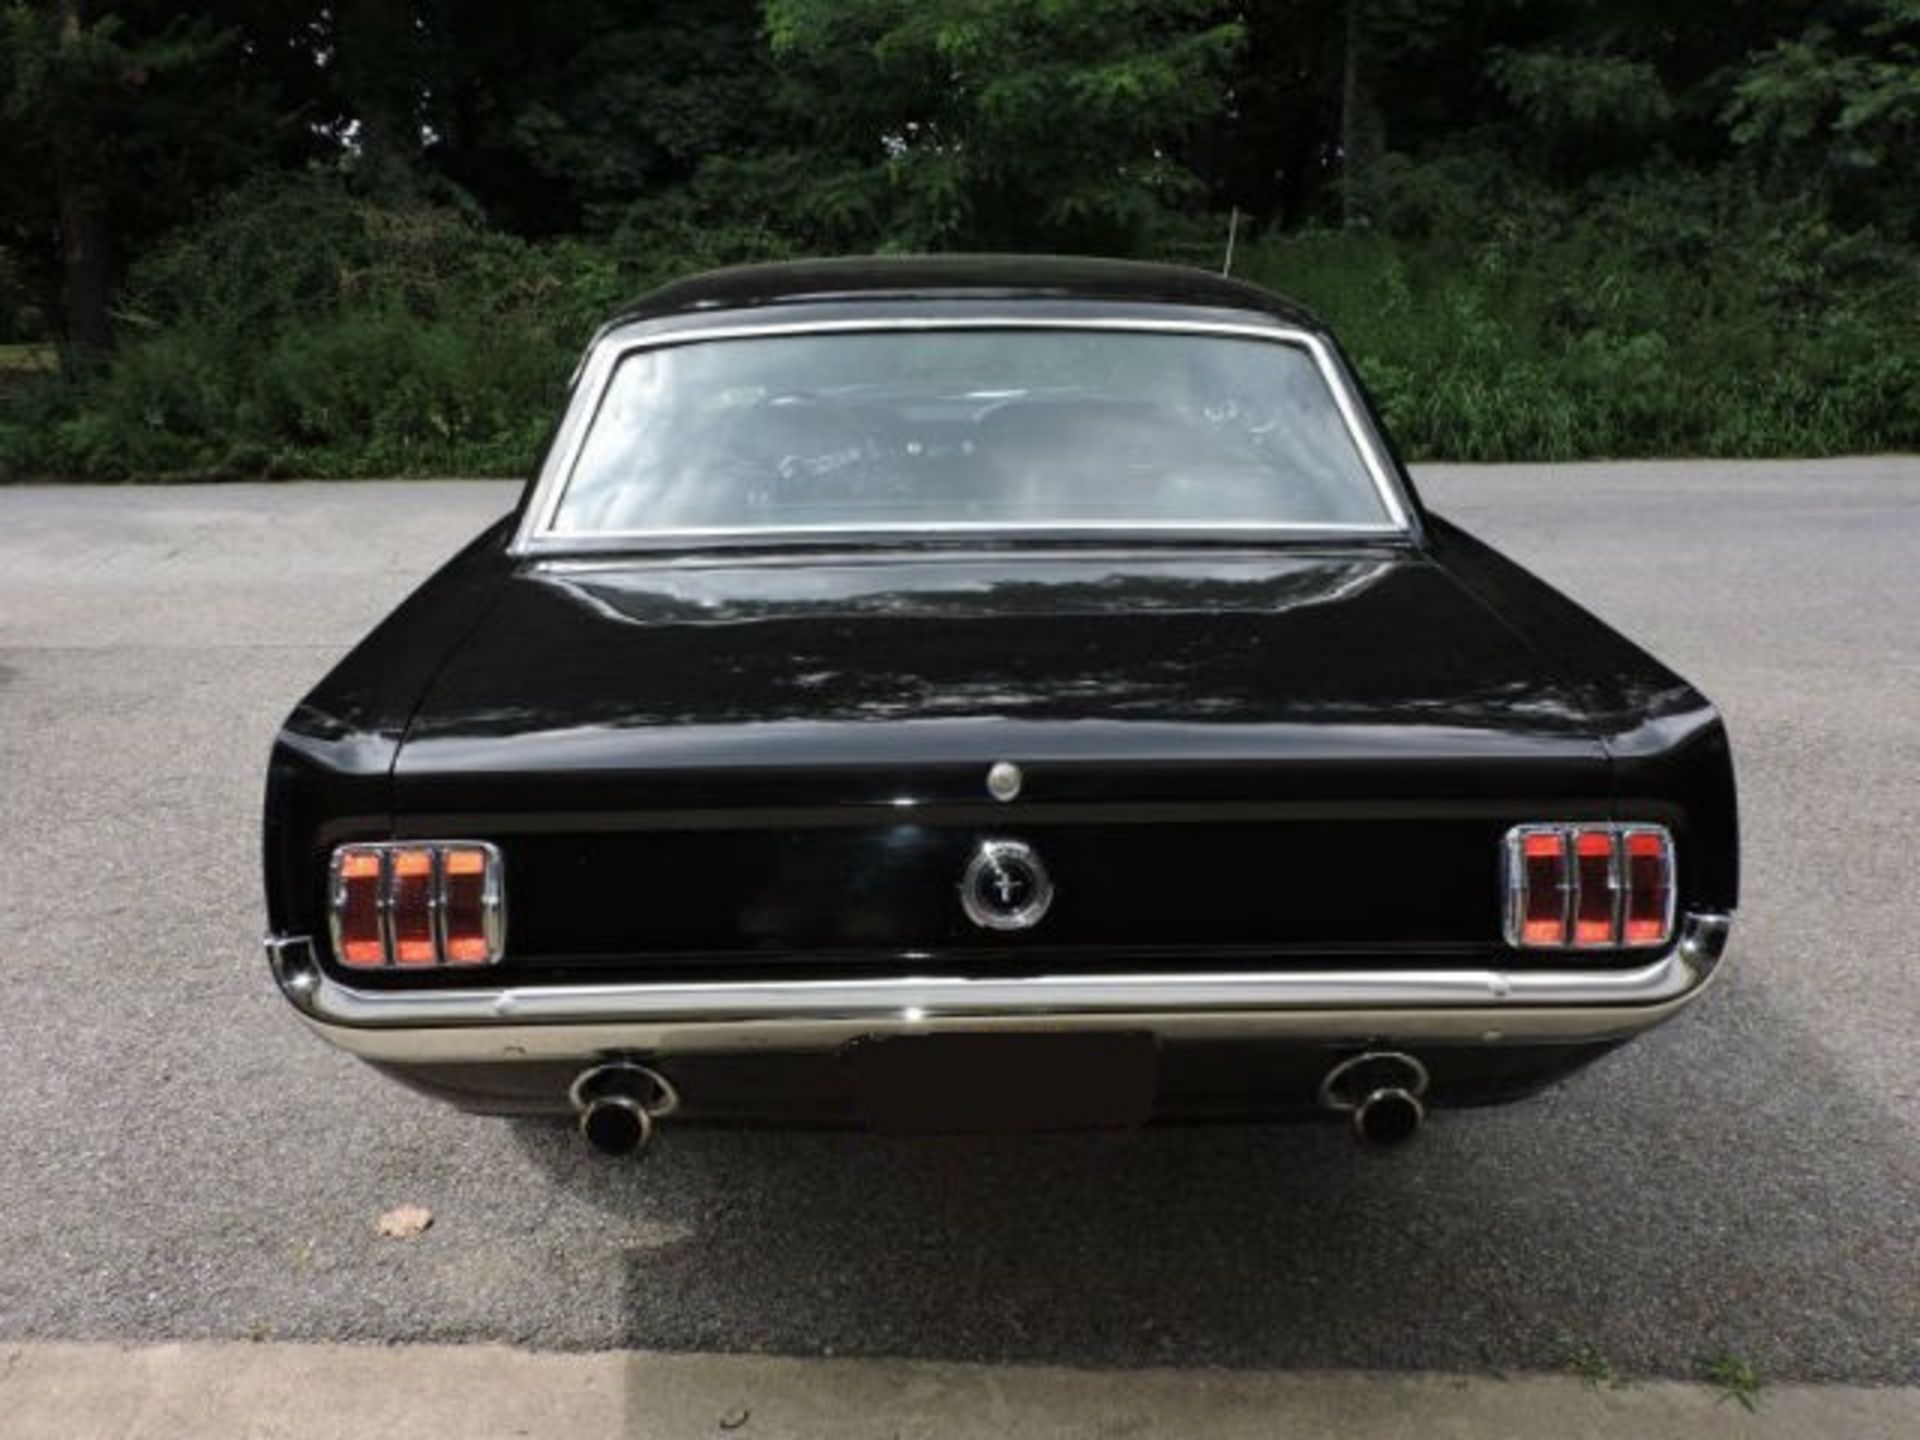 65' Ford Mustang - Year 1965, Automatic Transmission, Original Factory A/C, 6 Cylinders, Approx 72, - Image 8 of 8